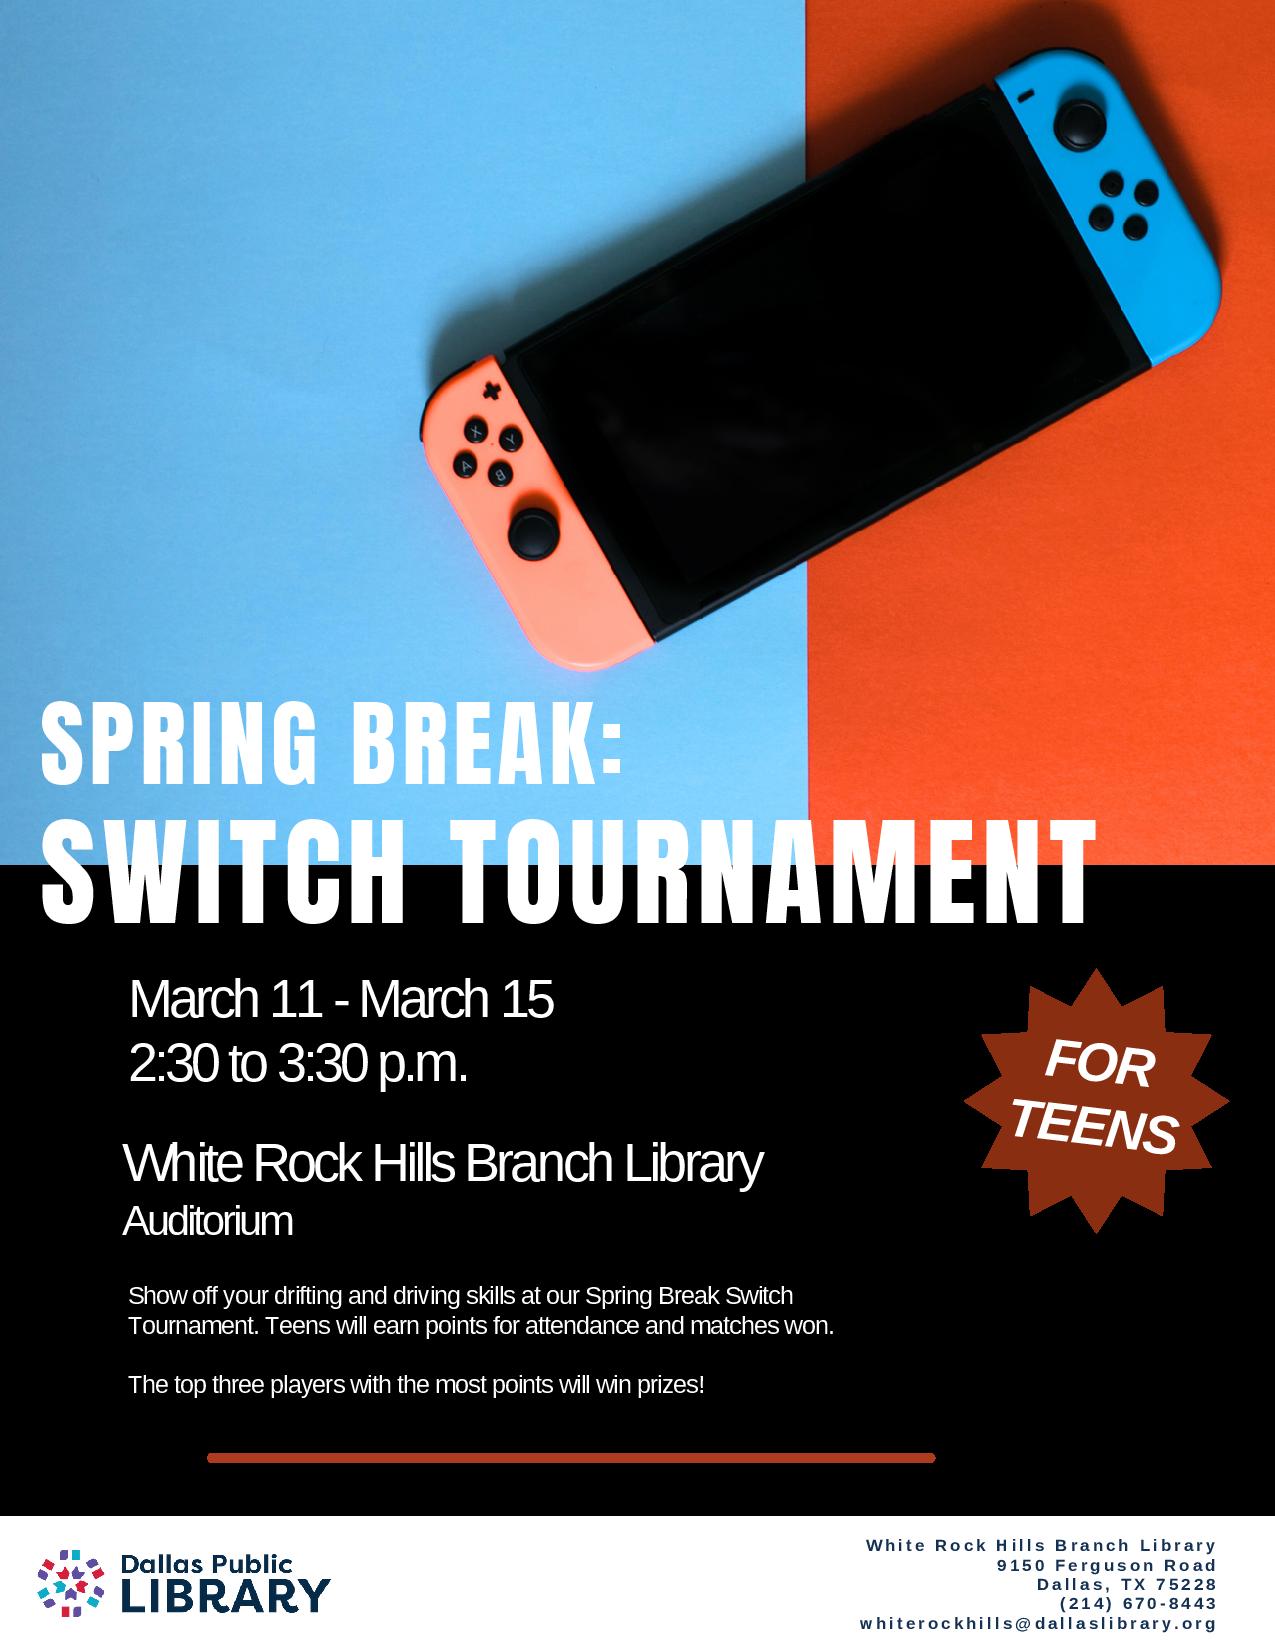 Spring Break: Switch Tournament. A picture of a Nintendo Switch on a blue and red background.